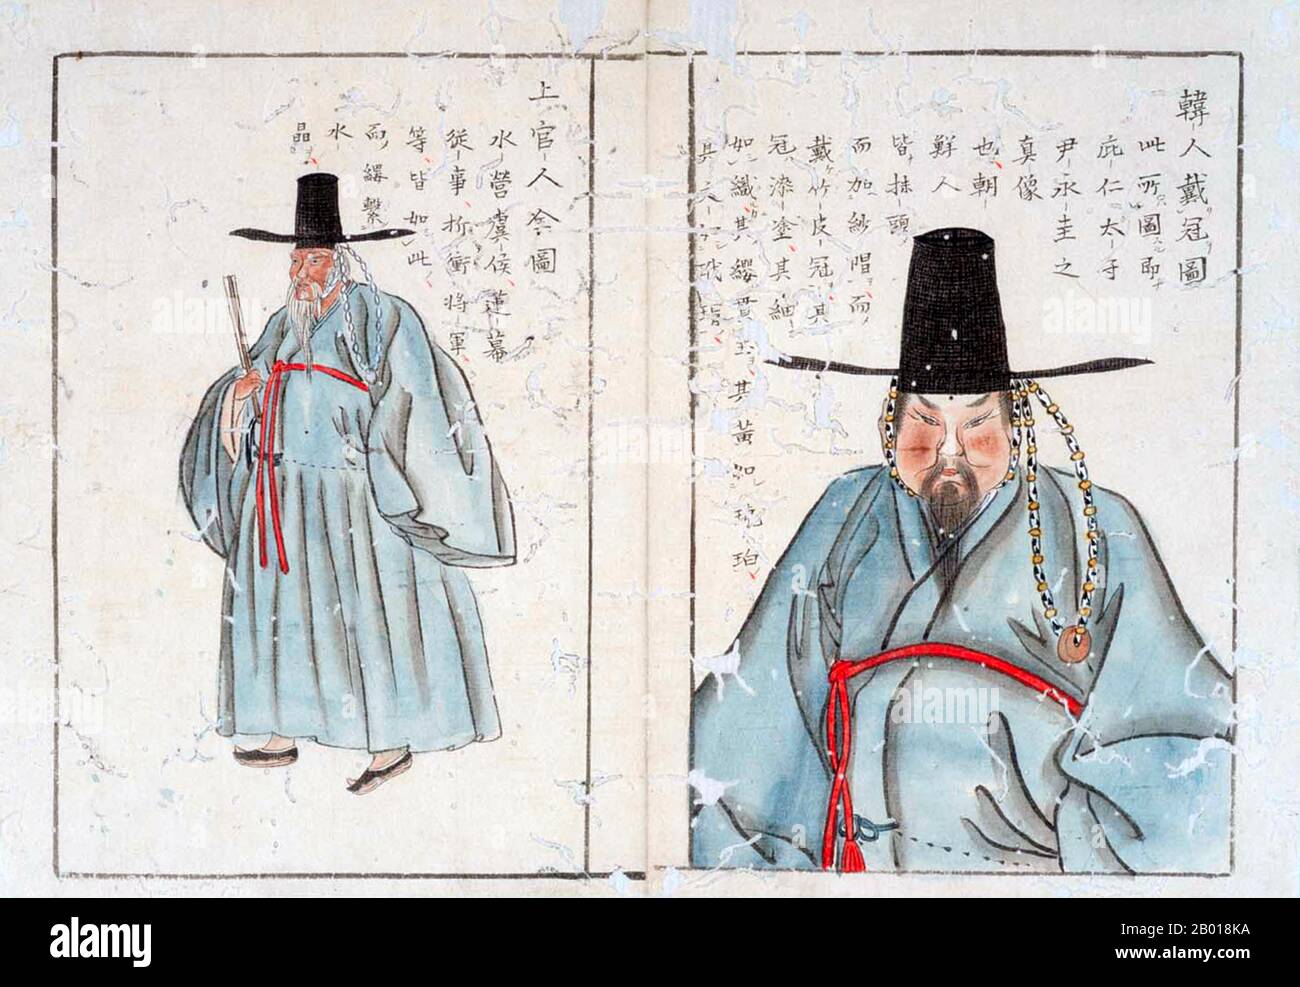 Korea: A Korean sage, late Joseon period.  Two pages from a 19th century Korean book depicting a Korean writer and sage. Stock Photo